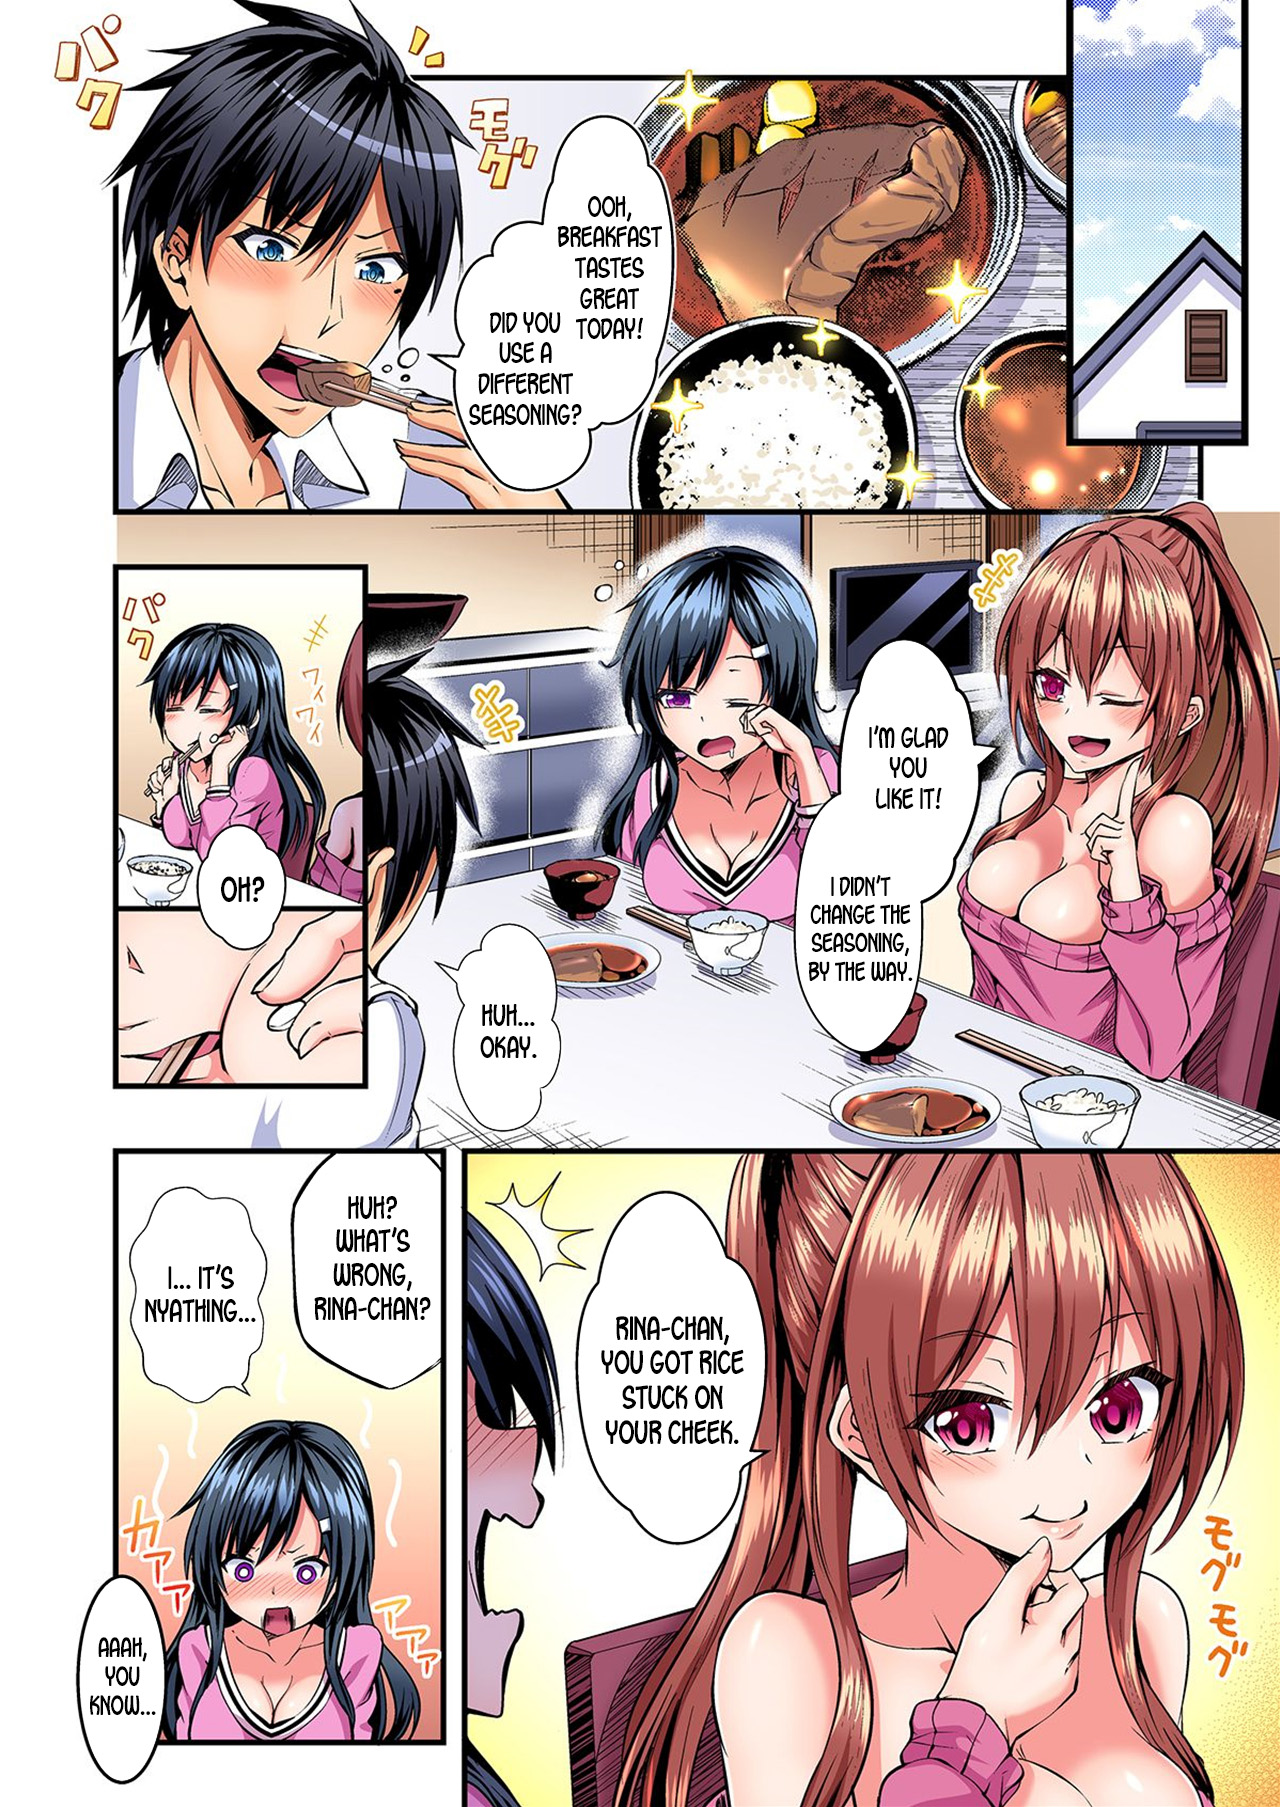 [Suishin Tenra] Switch bodies and have noisy sex! I can't stand Ayanee's sensitive body ch.1-2 [desudesu] page 3 full